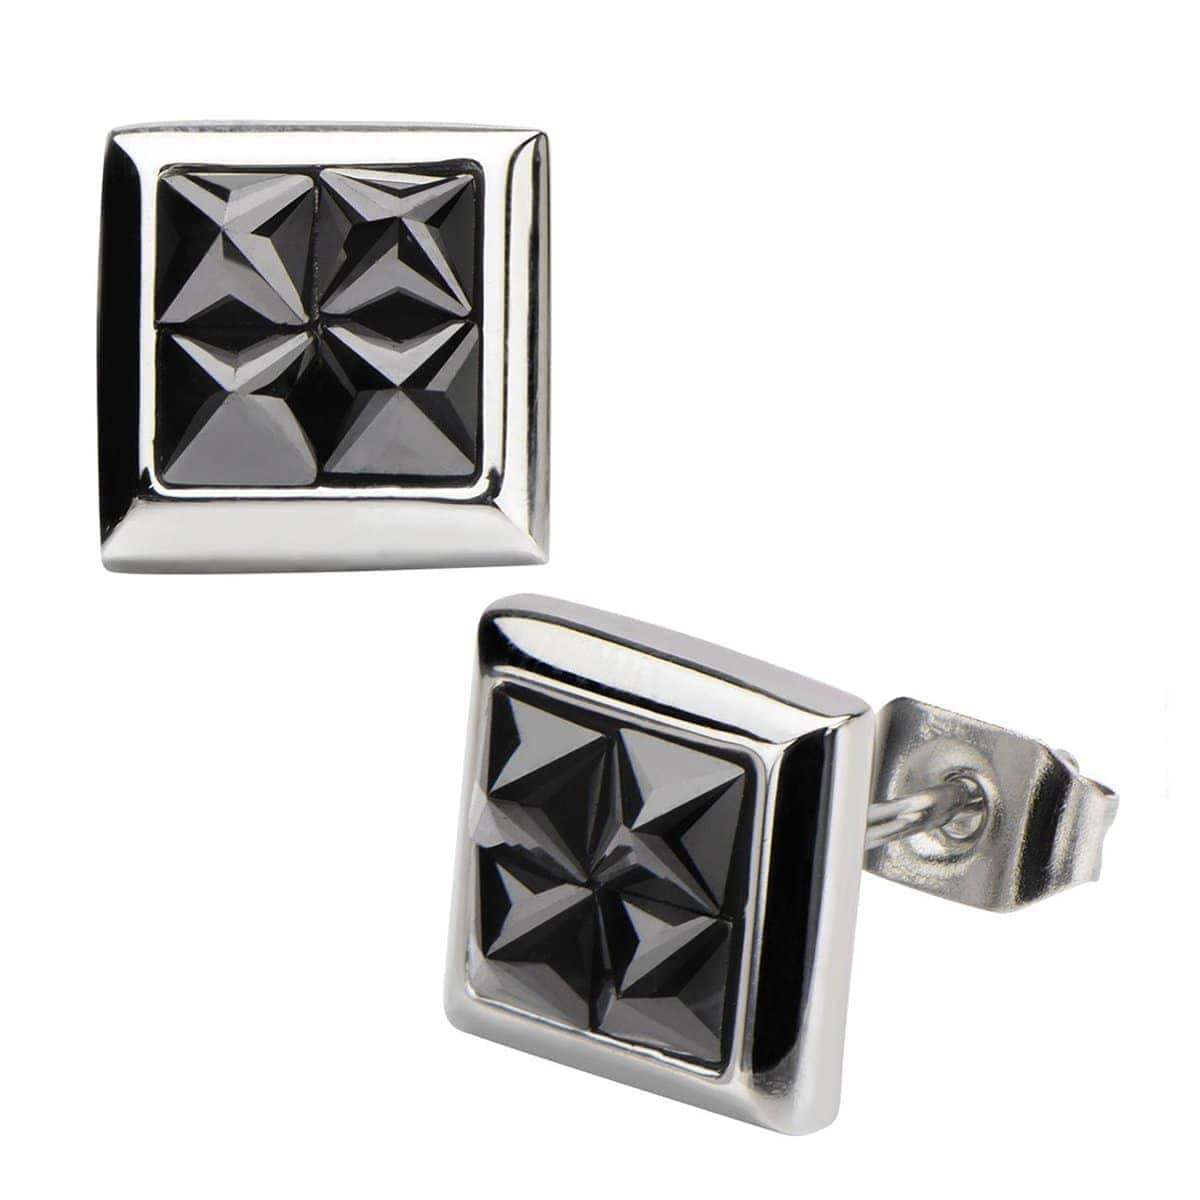 INOX JEWELRY Earrings Silver Tone Stainless Steel Four Black Pyramid Crystals Square Studs SSE818SK